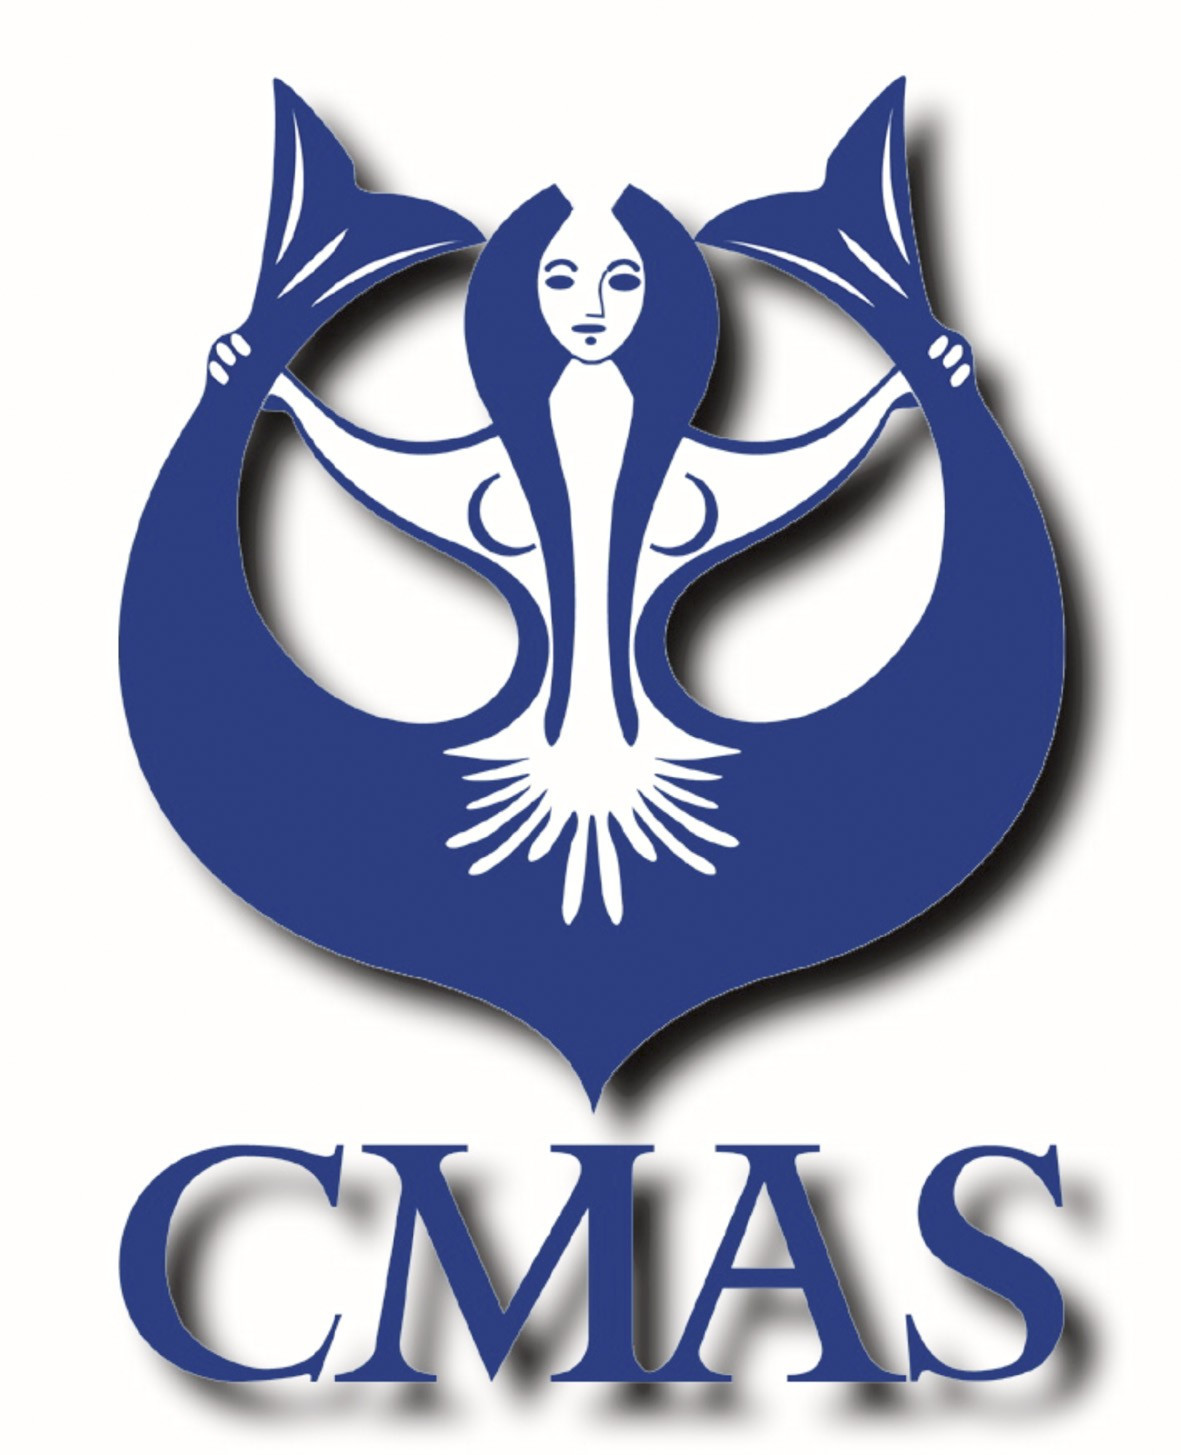 Seven countries won gold medals on day two in Tomsk ©CMAS 